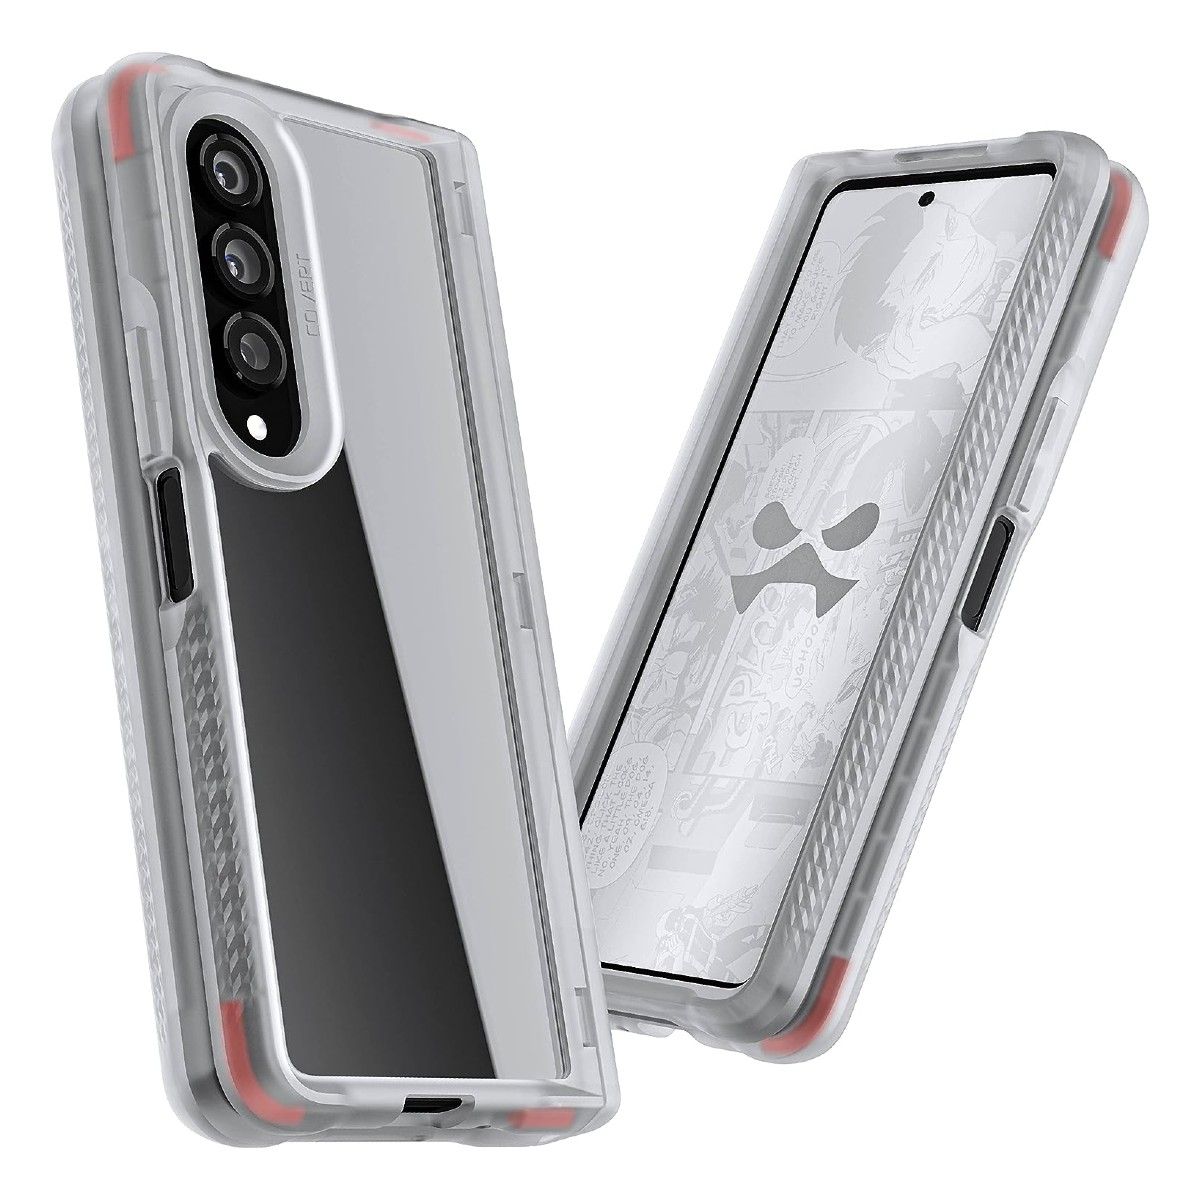  X-FOUR Z Fold 4 Case Magnetic Hinge Protection - Cover